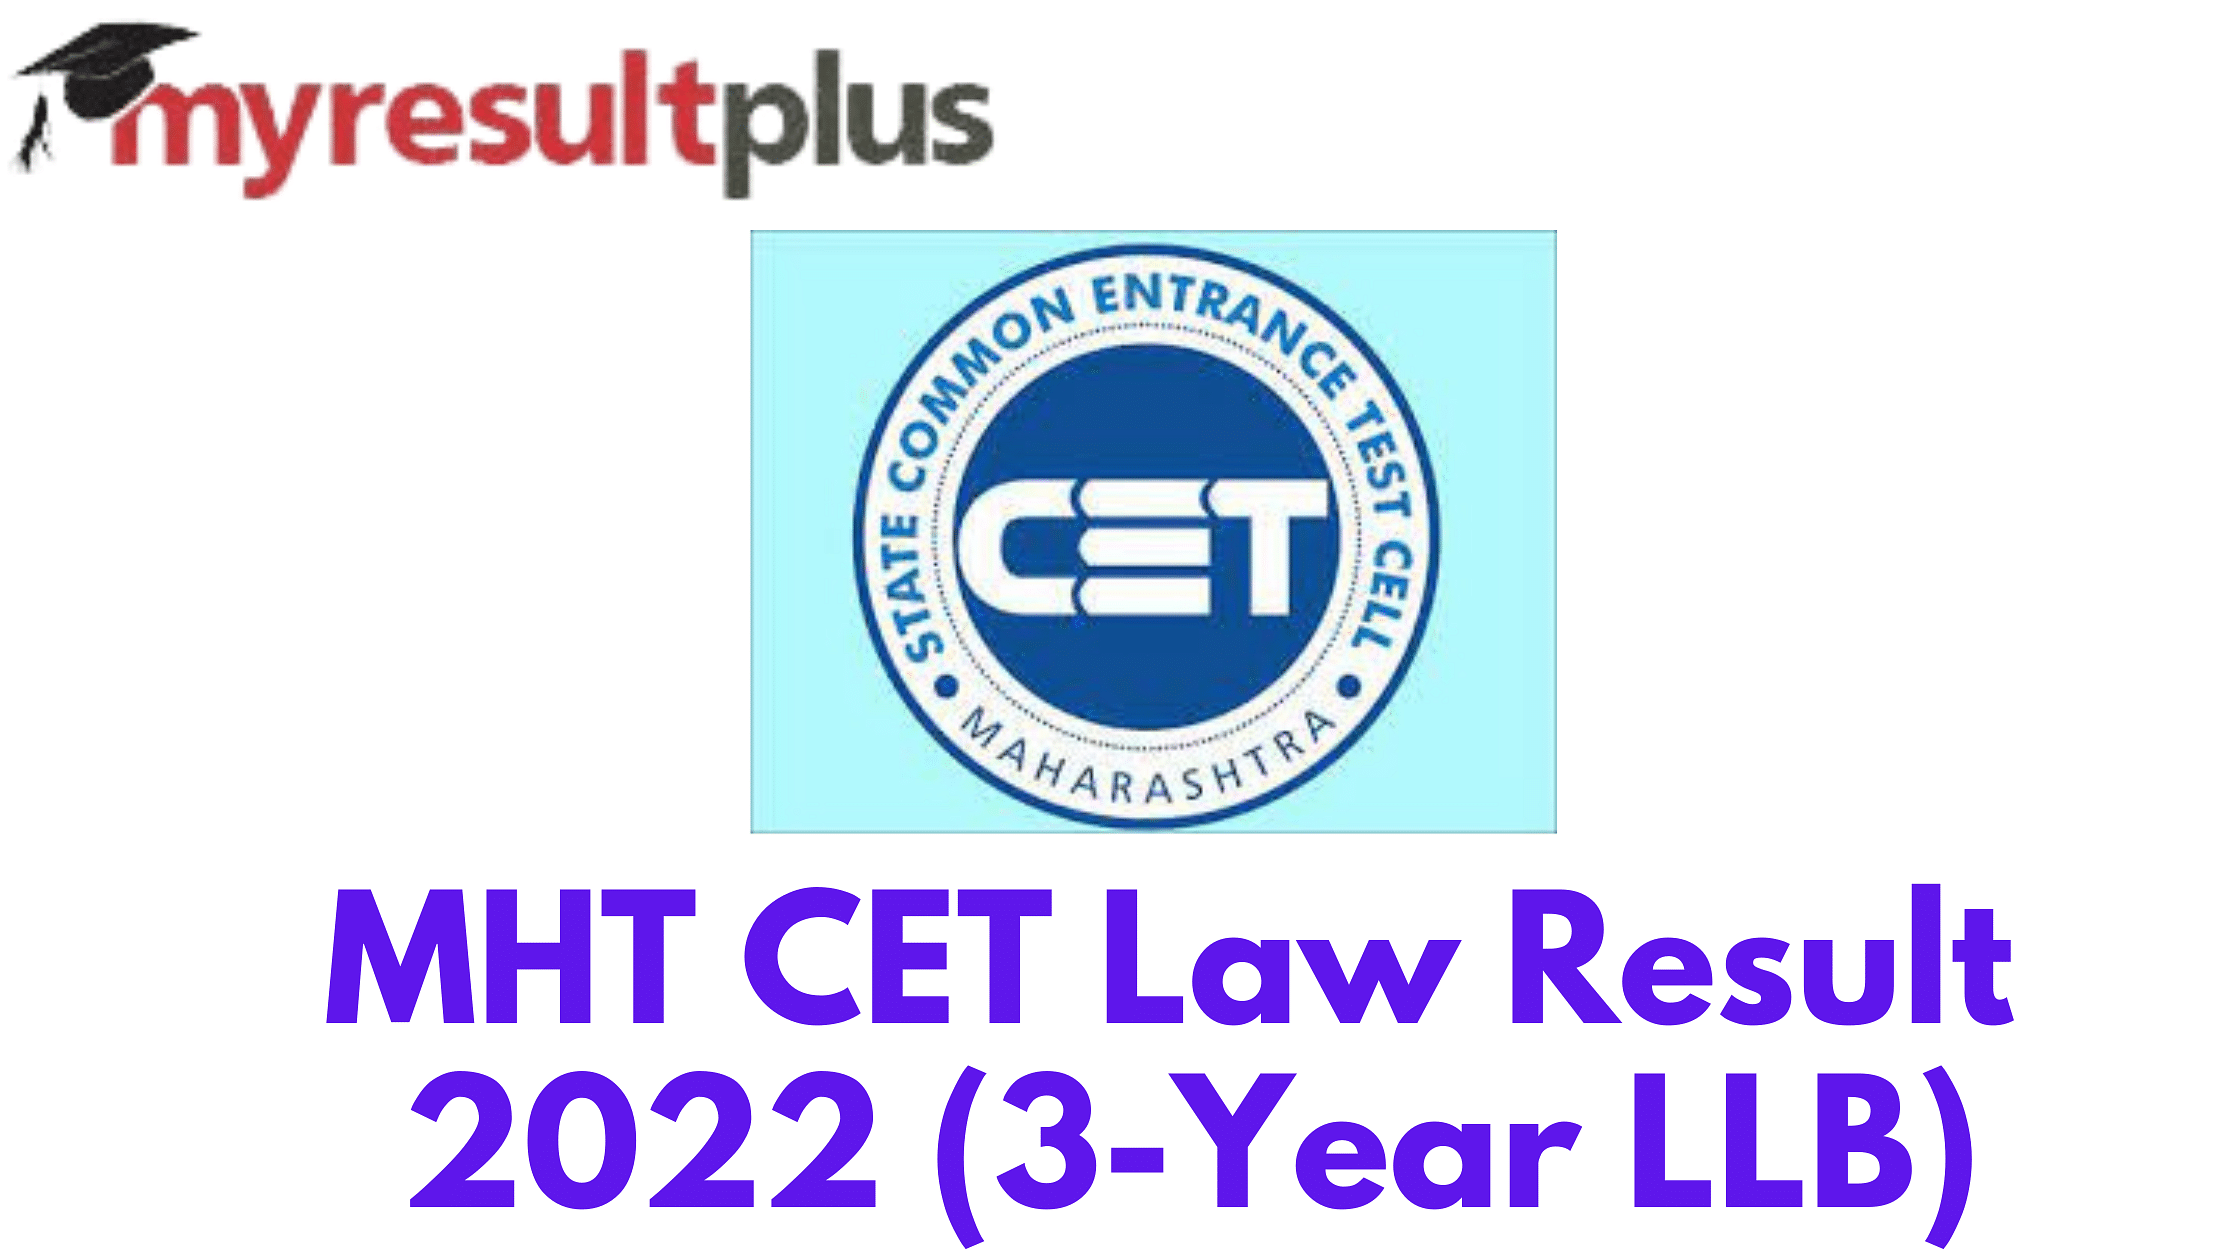 MHT CET Law Result 2022 Announced For 3-Year LLB, Here's Direct Link to Download Scorecards